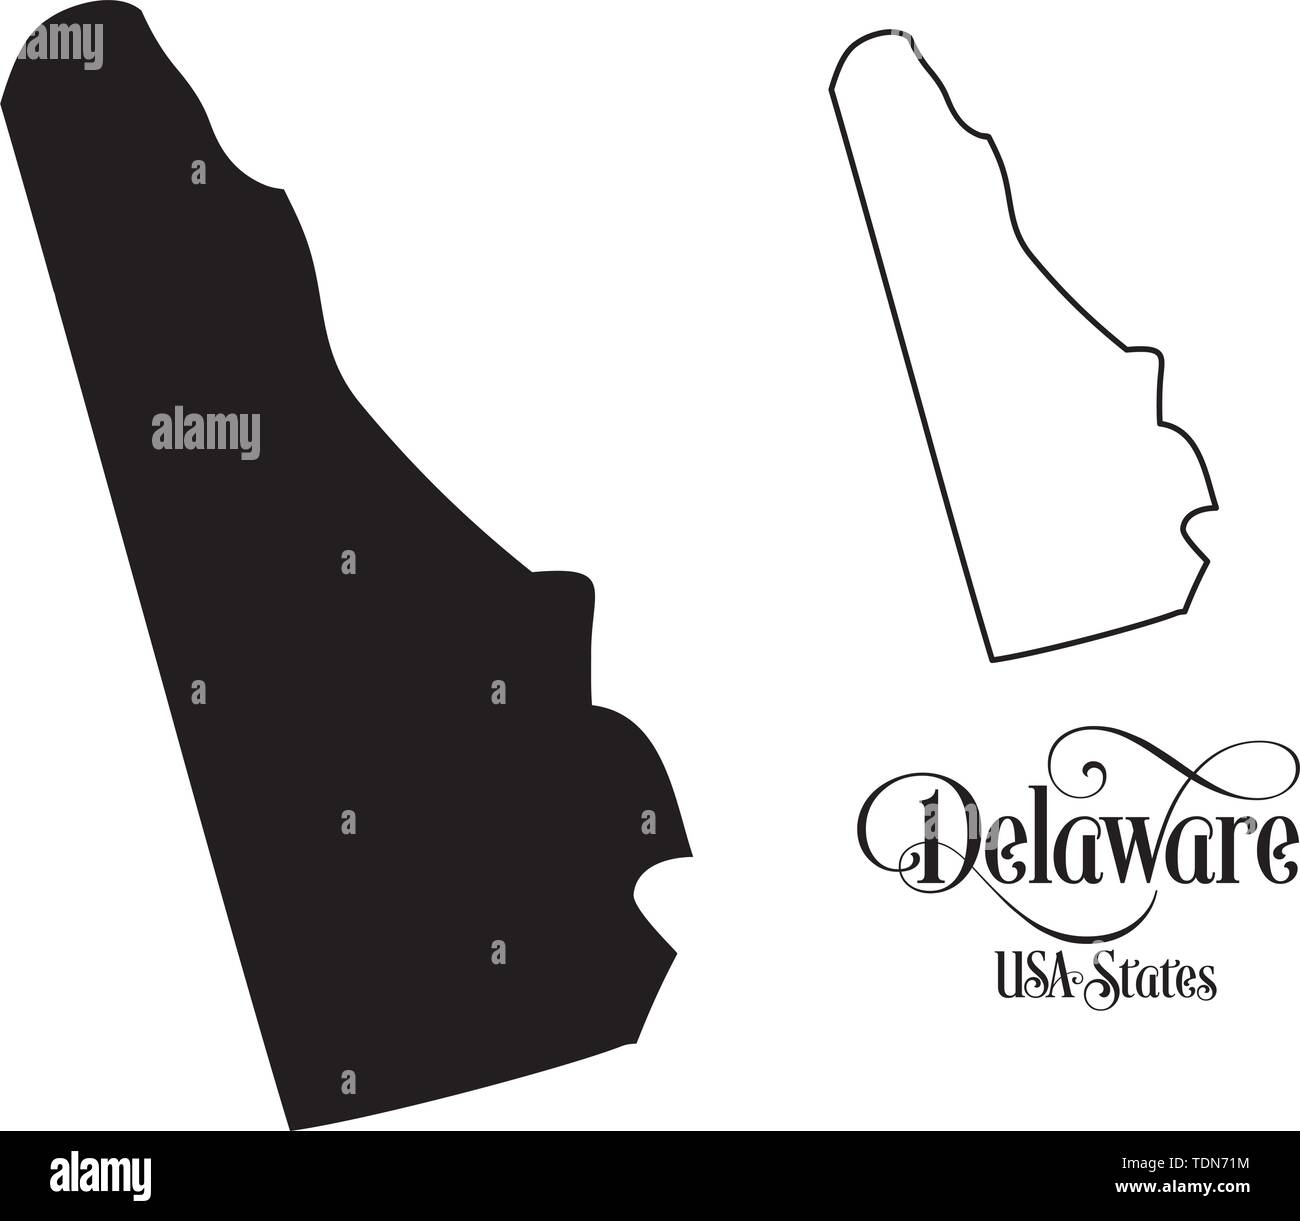 Map of The United States of America (USA) State of Delaware - Illustration on White Background. Stock Vector